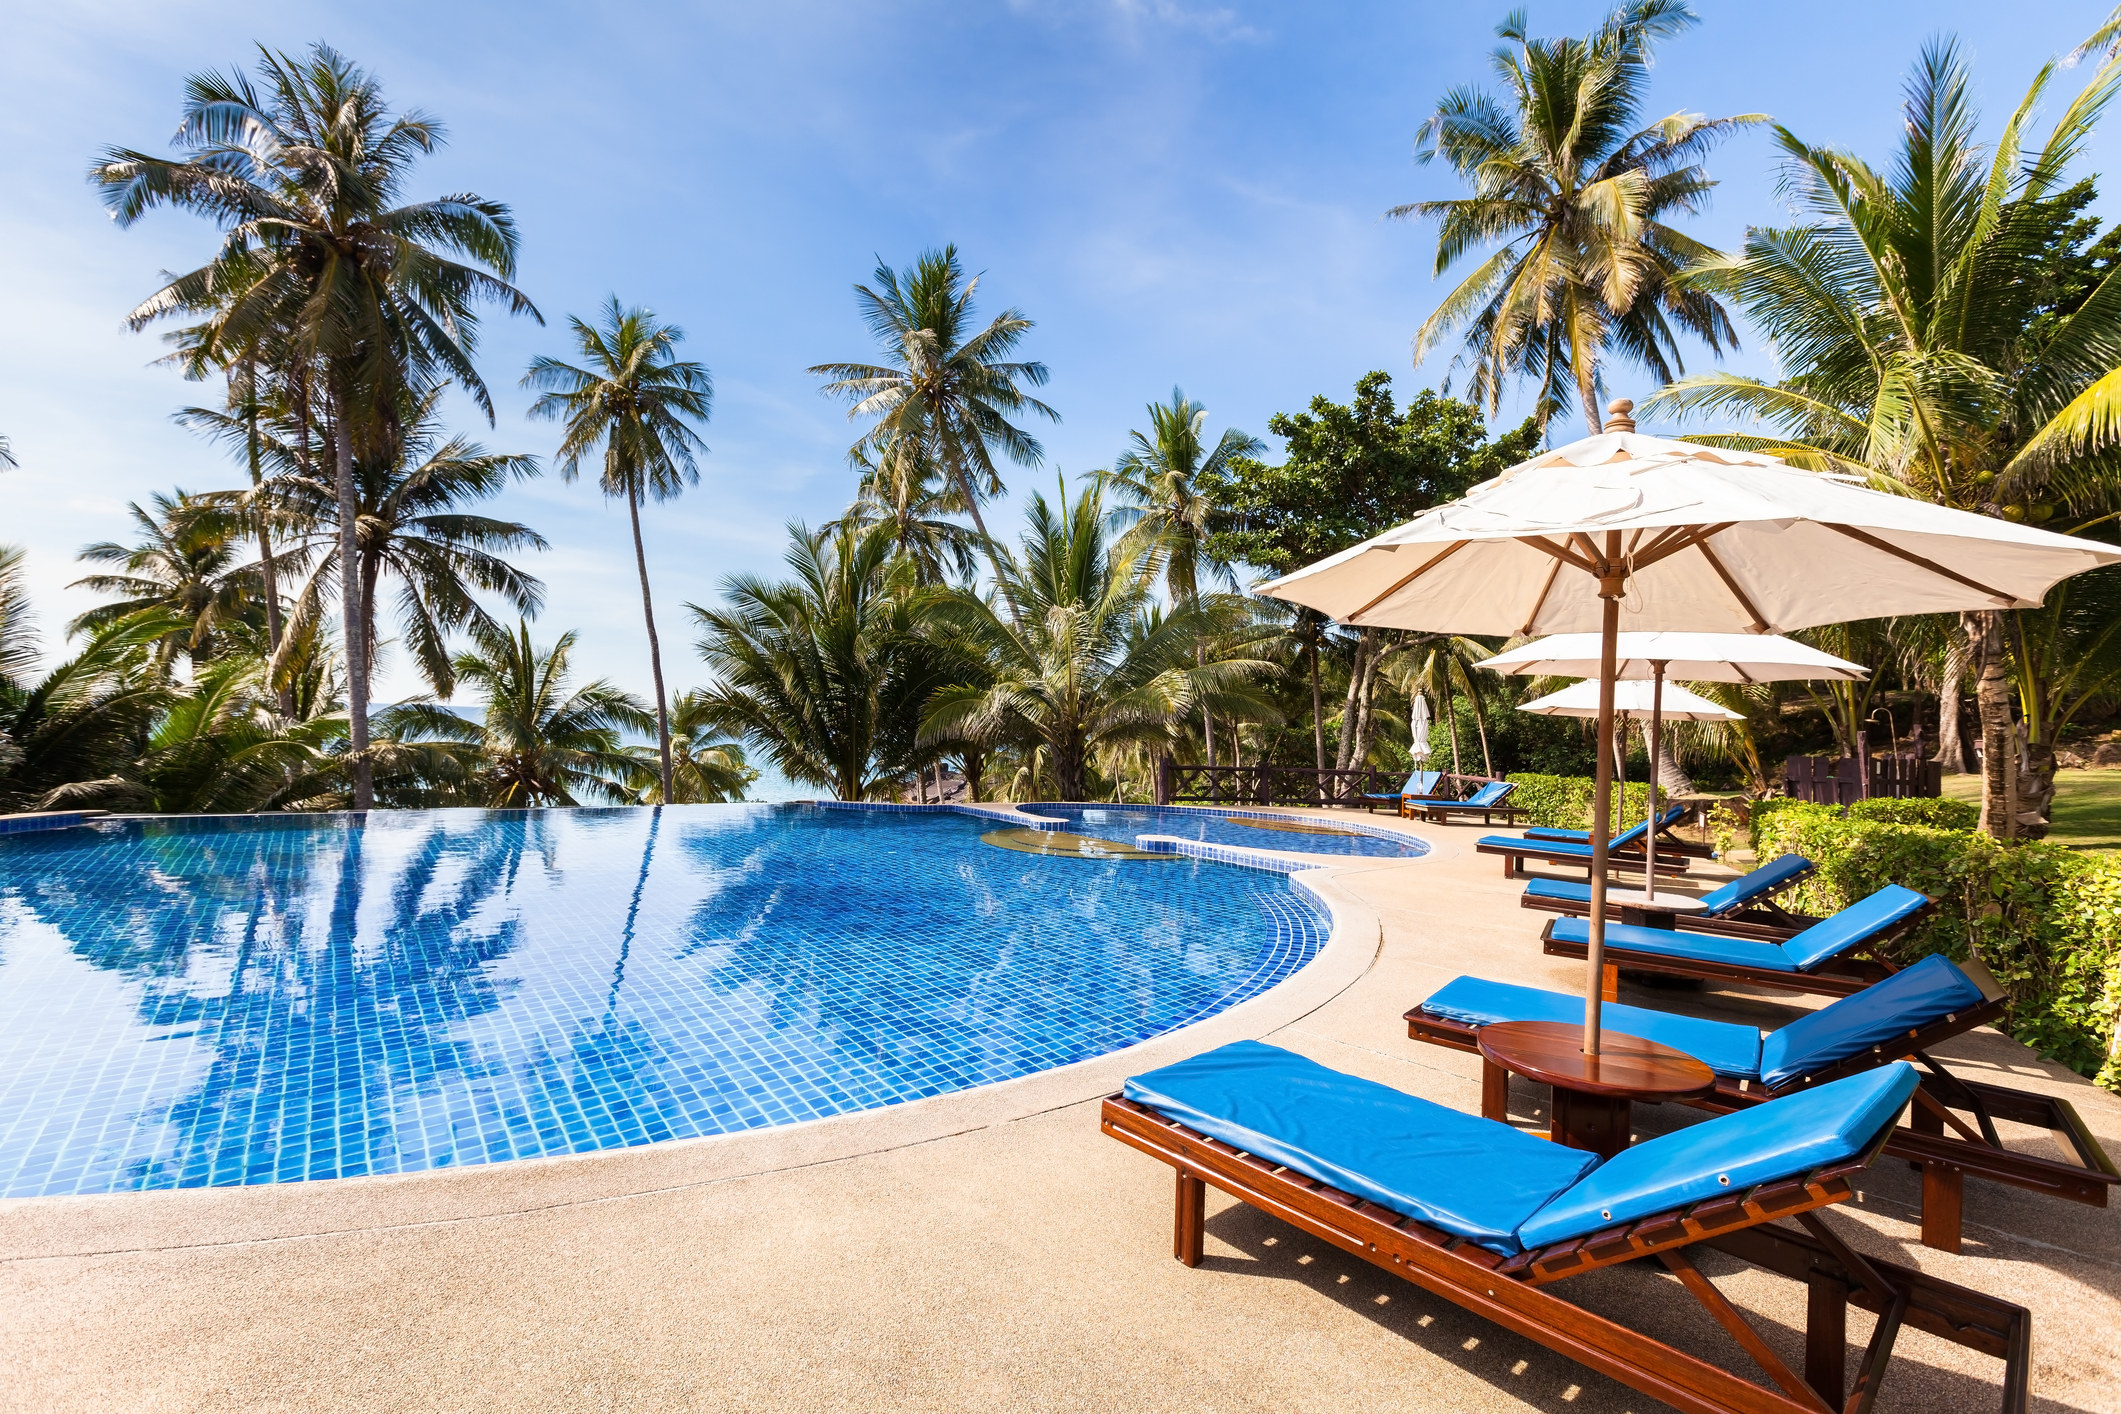 A large pool surrounded by palm trees and lounge chairs